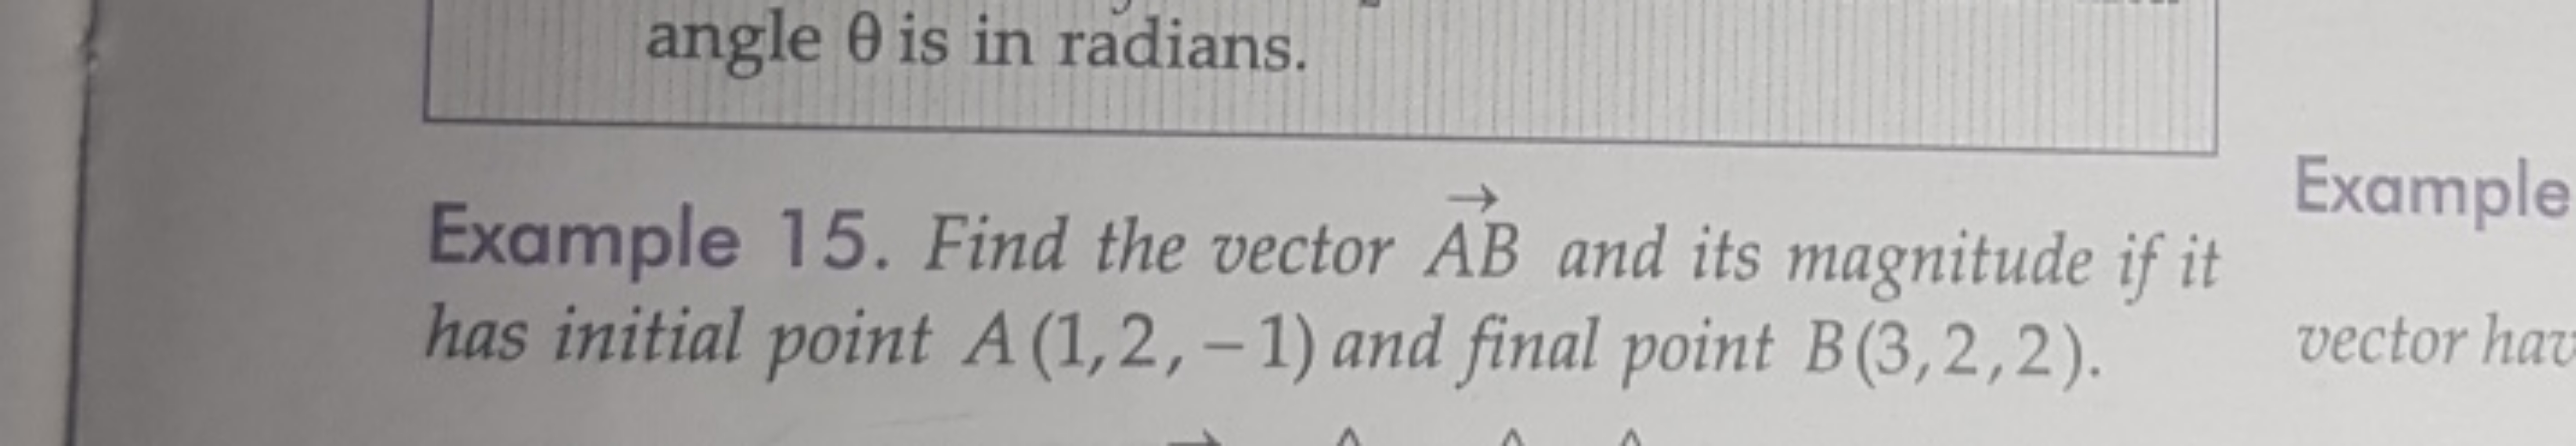 angle θ is in radians.
Example 15. Find the vector AB and its magnitud